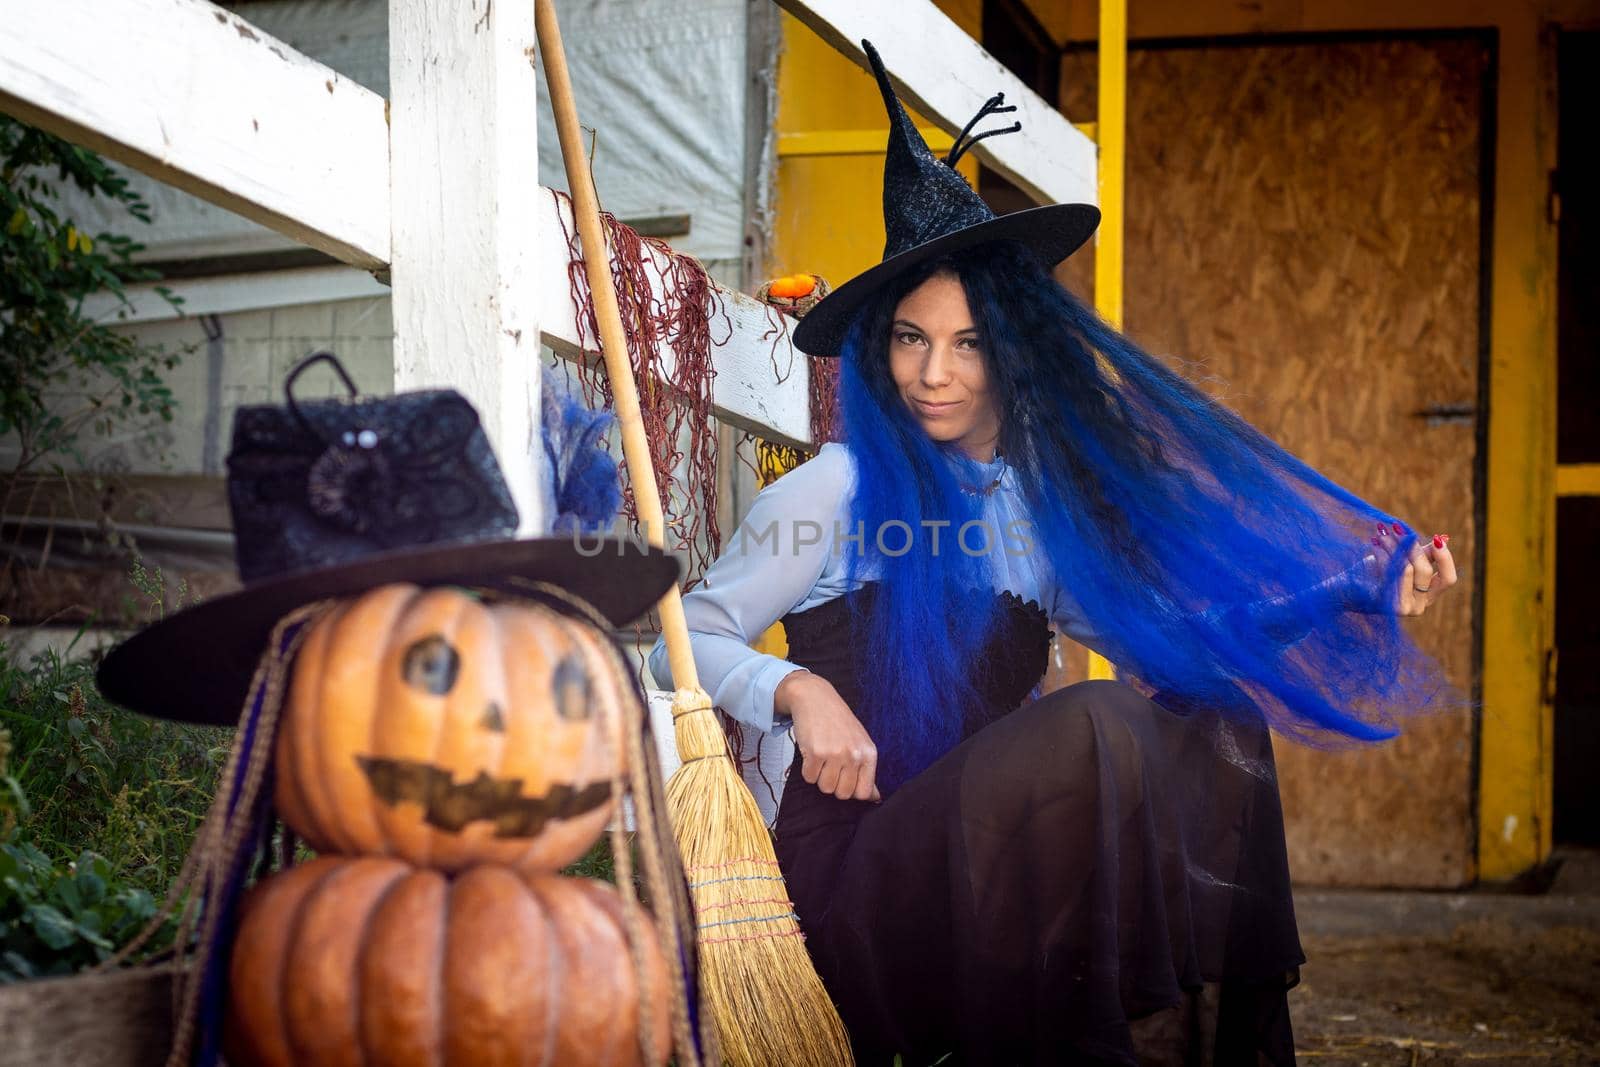 A witch with blue hair sits by the fence next to an evil pumpkin figure by Madhourse